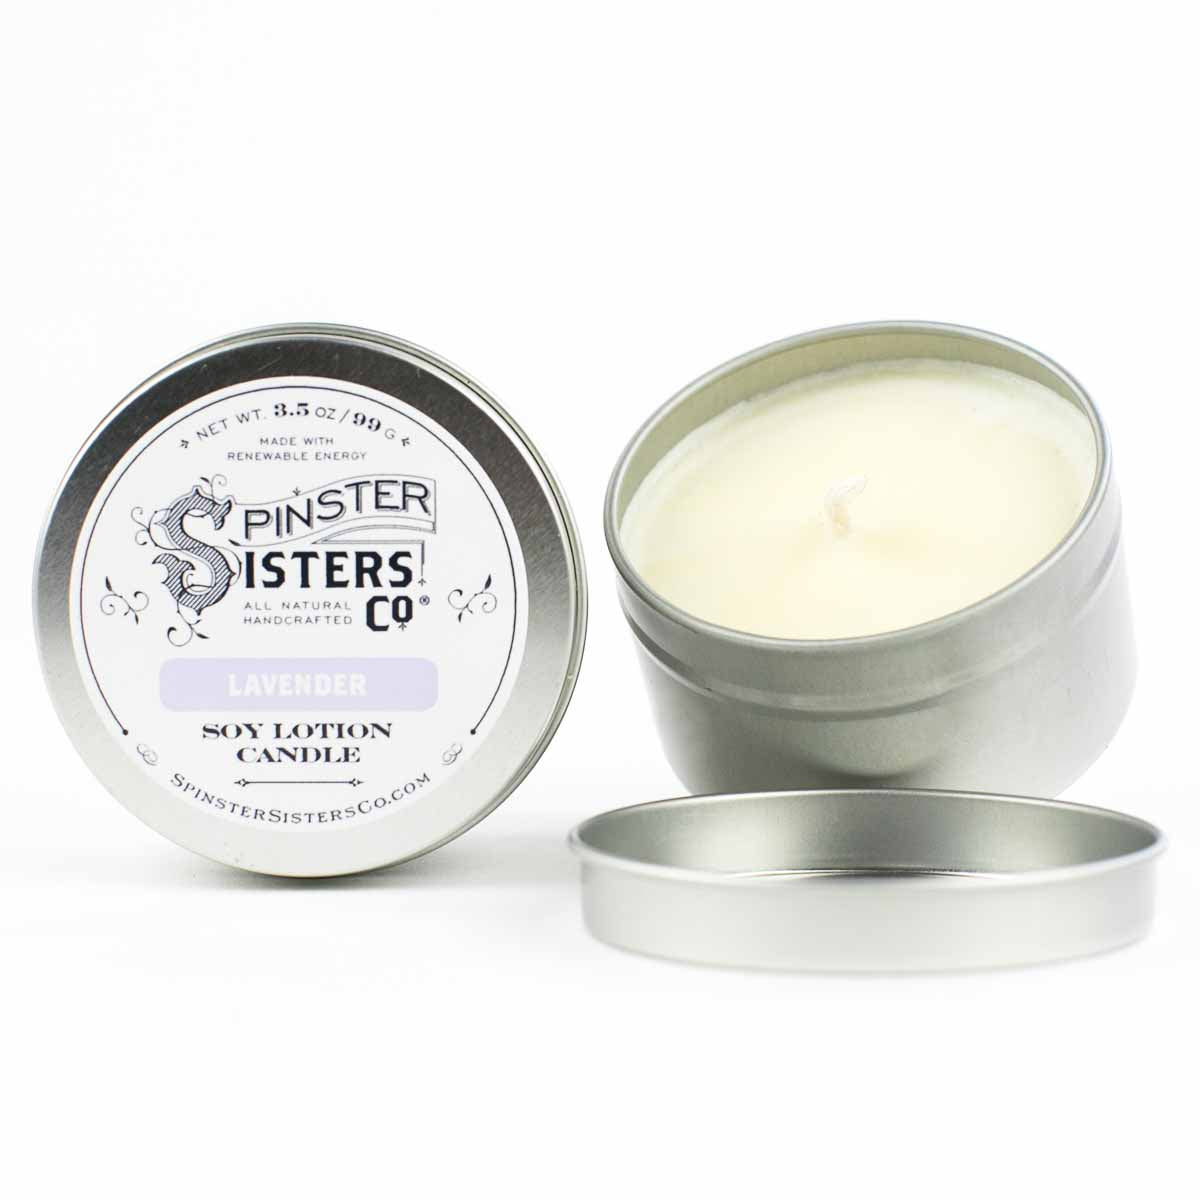 Spinster Sisters Soy Lotion Candle - Lavender